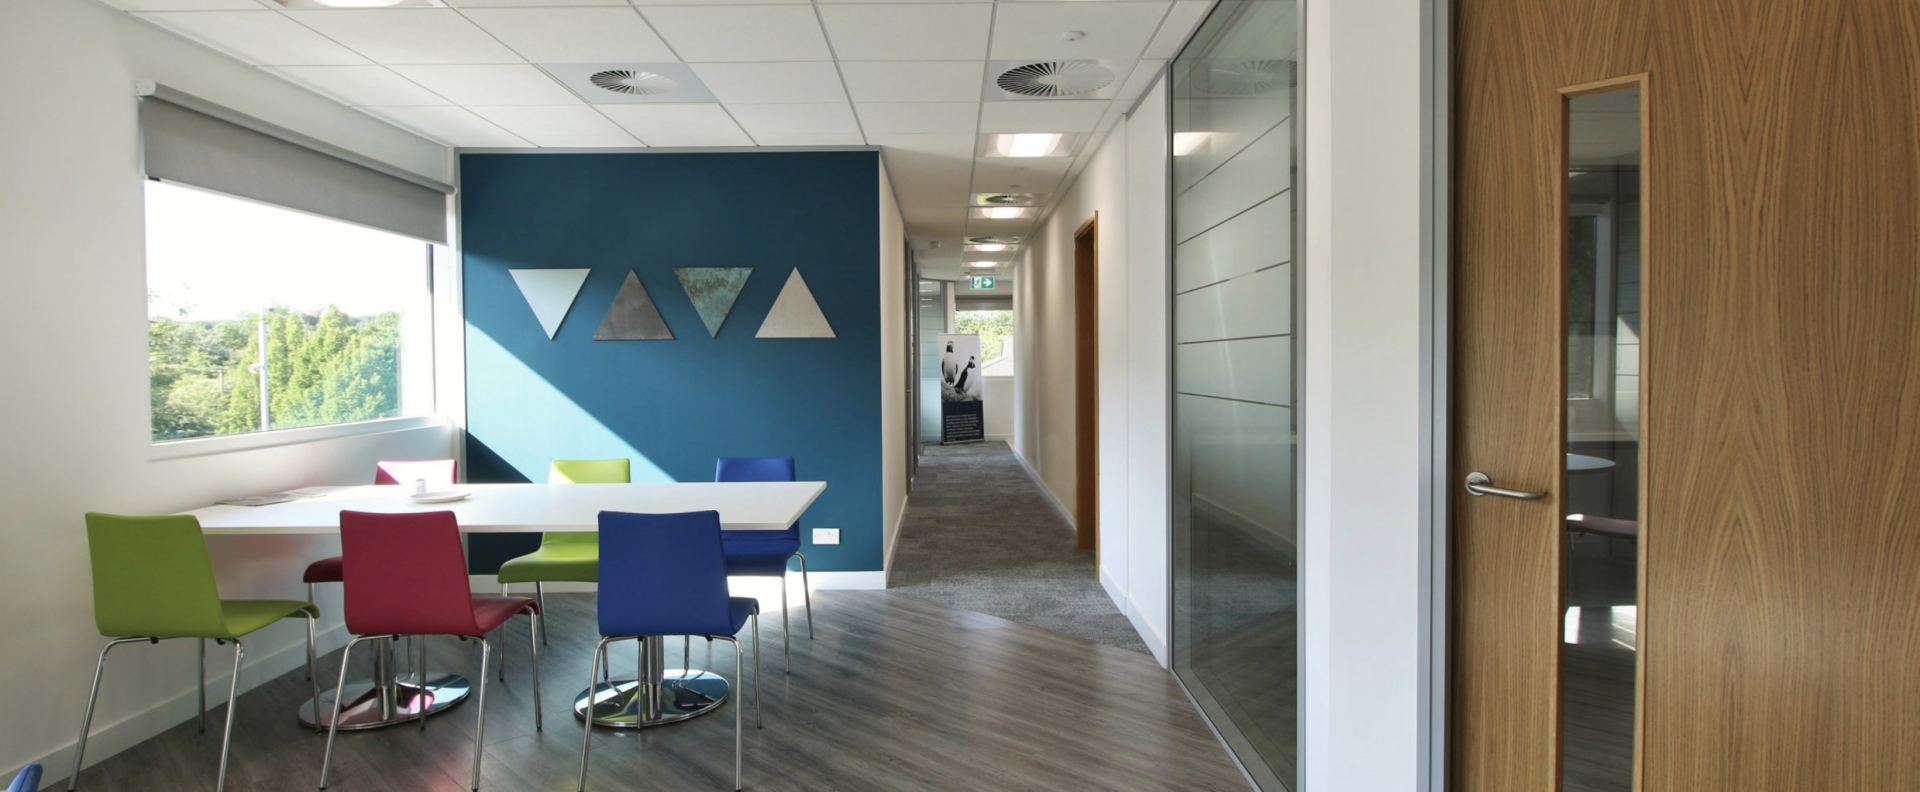 Colourful workplace design by Glenside